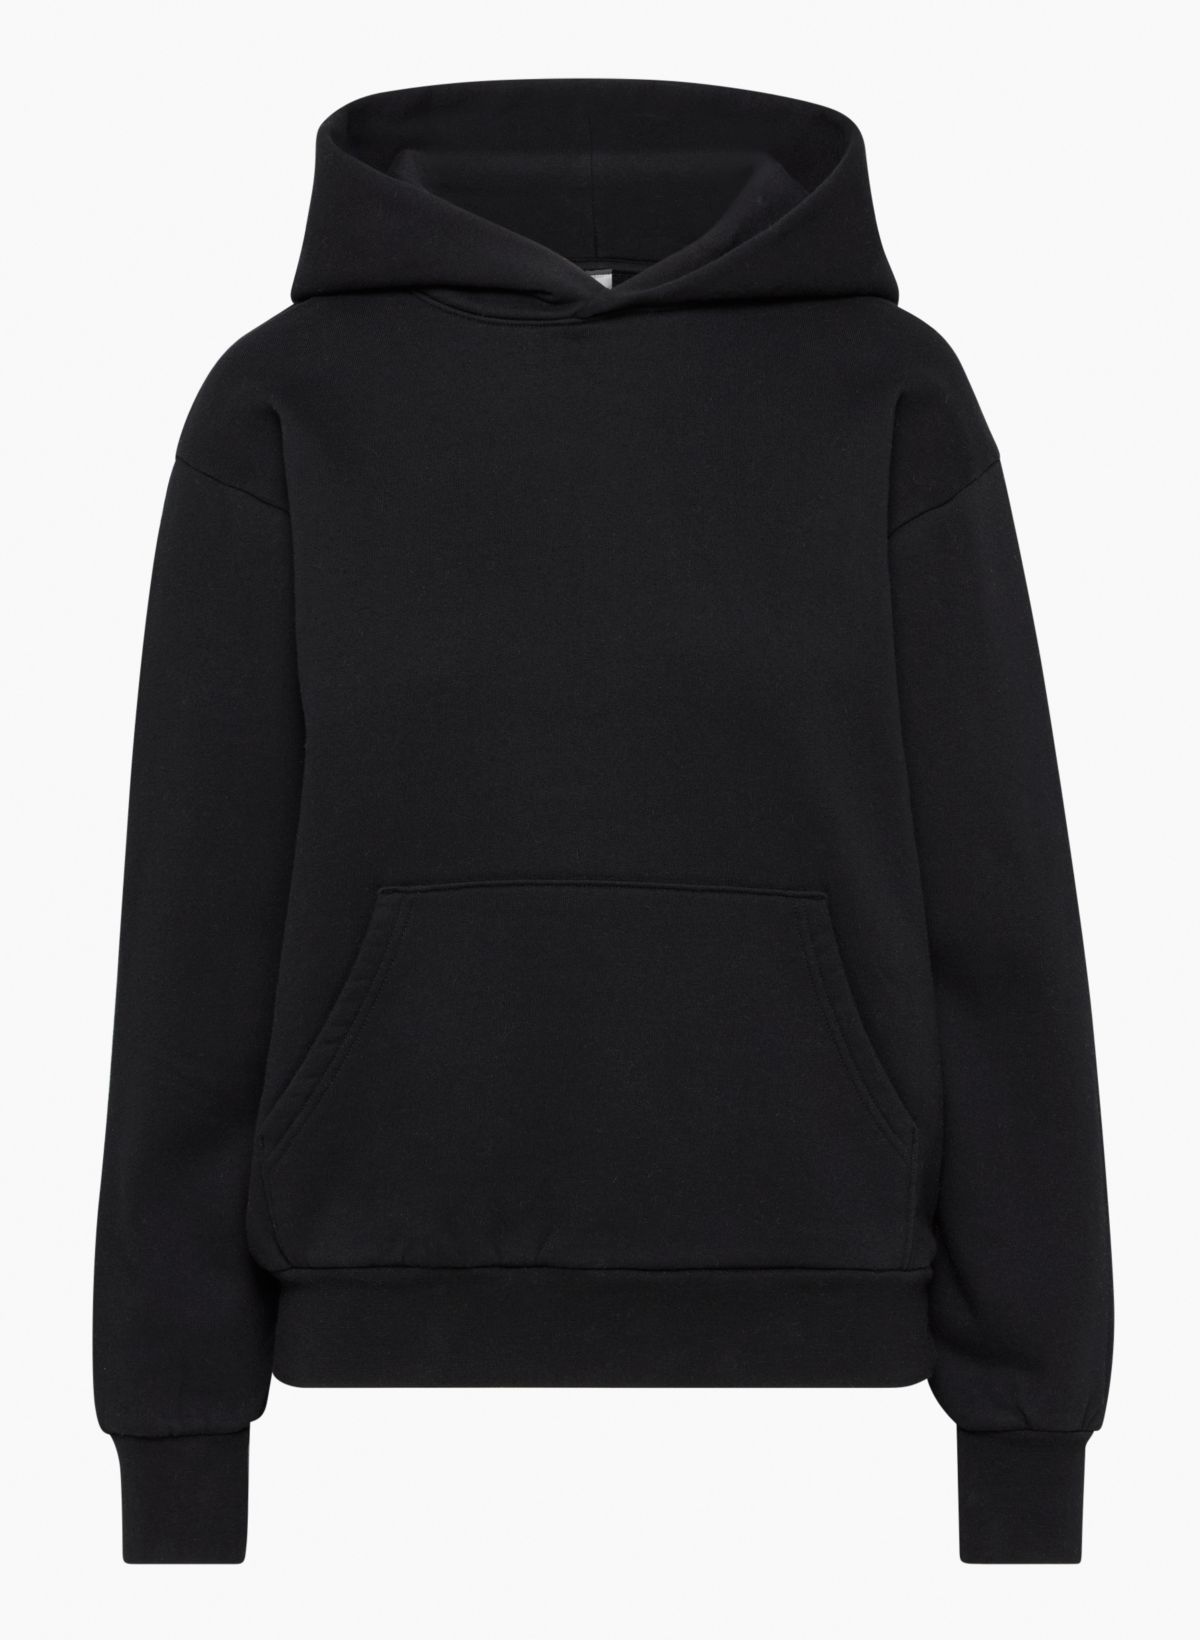 Louis Vuitton Mens Hoodies, Black, XXL (Stock Confirmation Required)